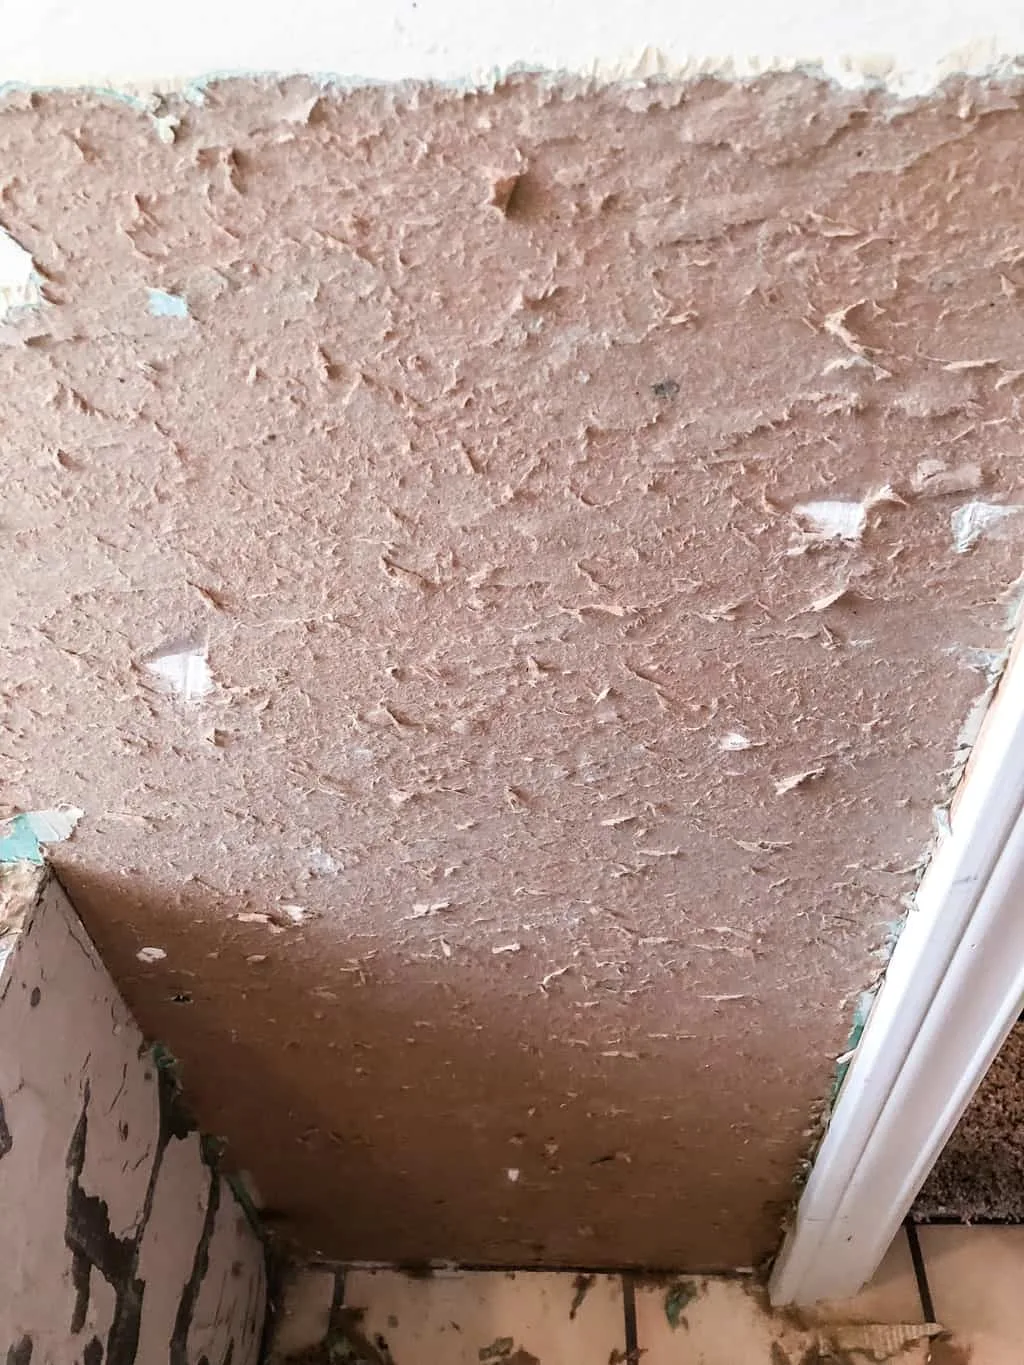 torn drywall paper section with brown layer exposed